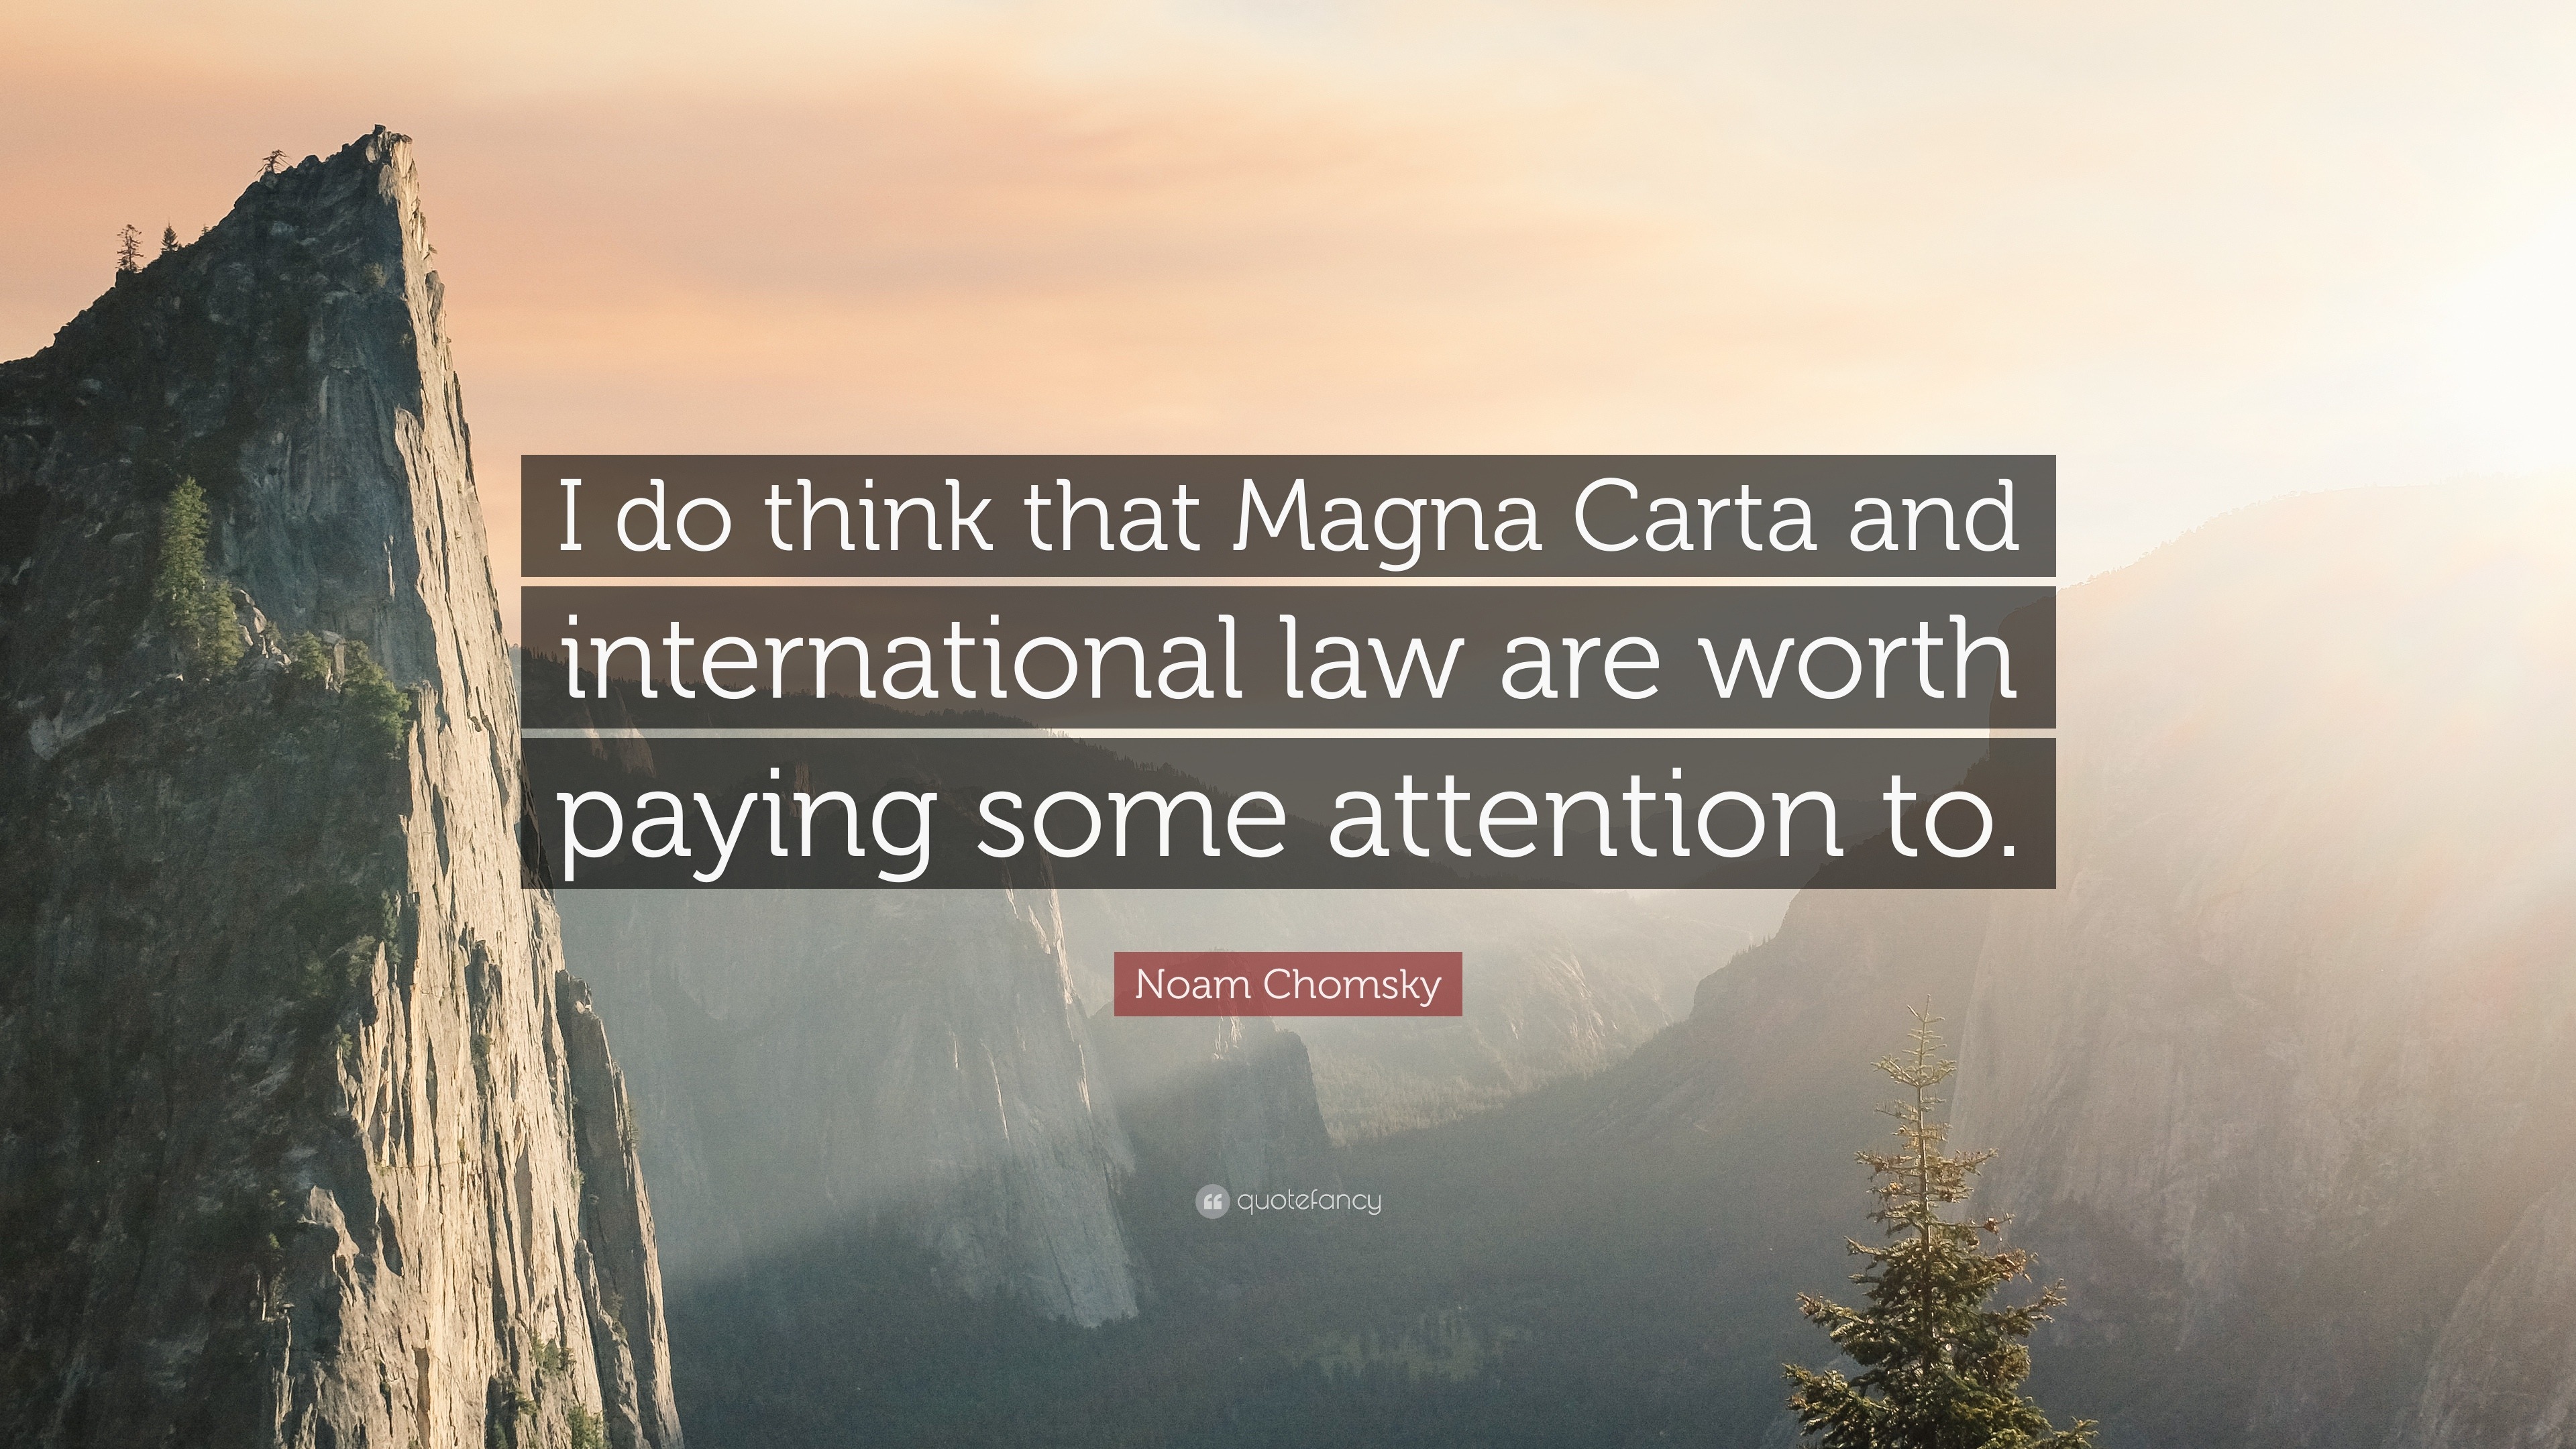 Noam Chomsky Quote: “I do think that Magna Carta and international law